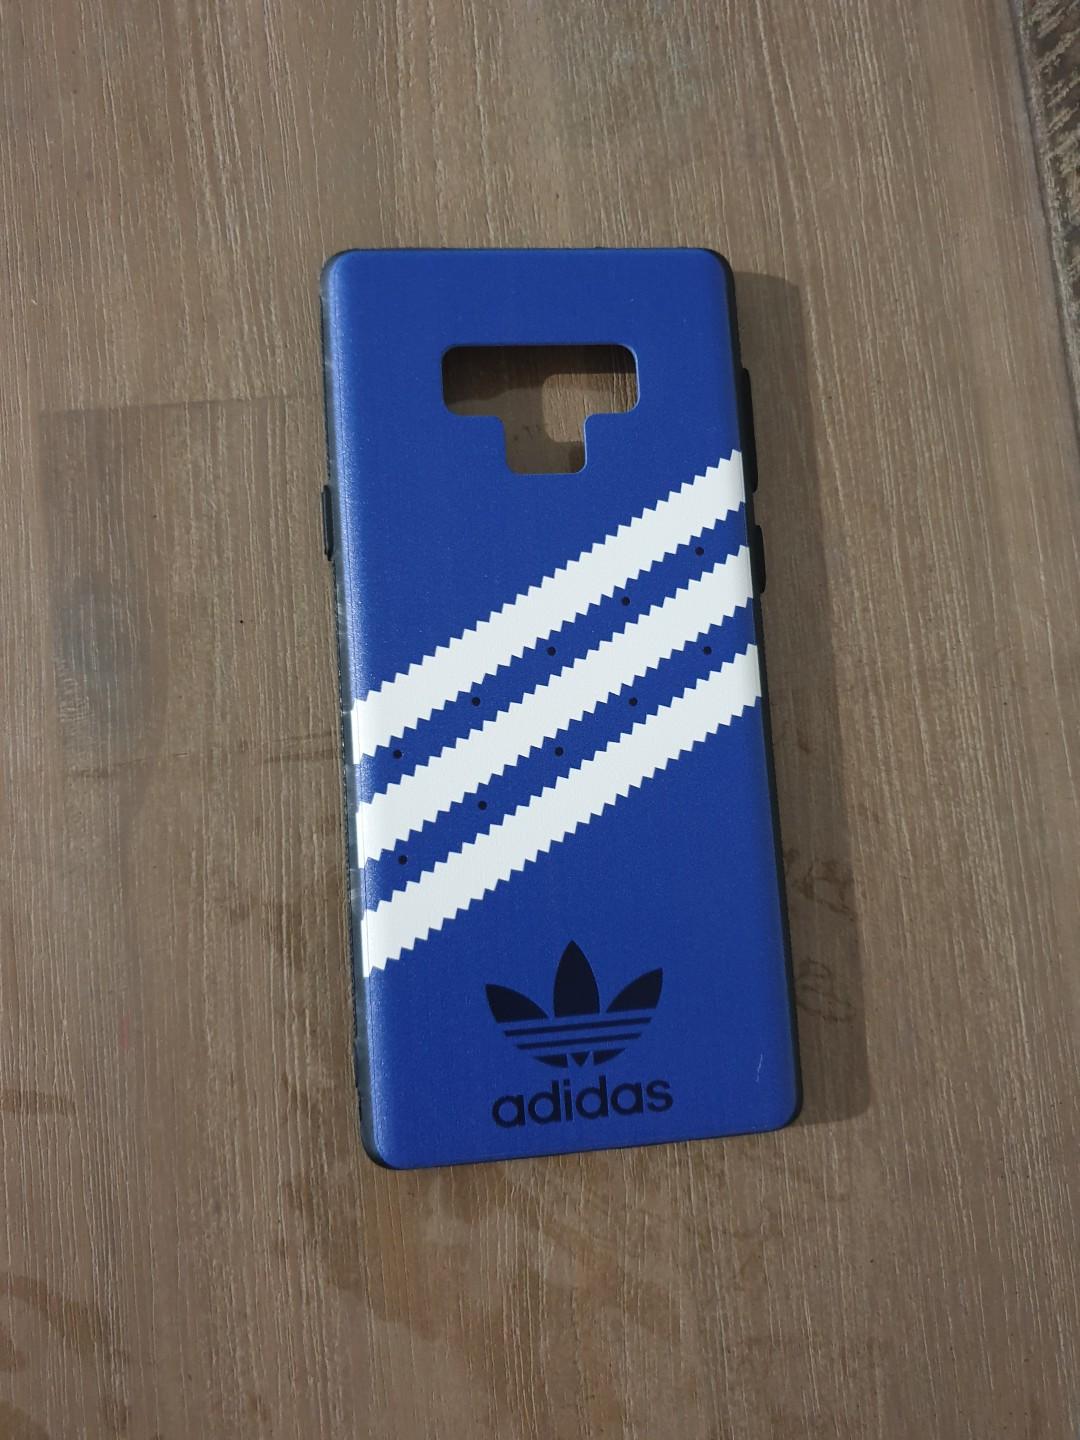 Samsung Note 9 Adidas Case, Mobile Phones \u0026 Tablets, Mobile \u0026 Tablet  Accessories, Mobile Accessories on Carousell